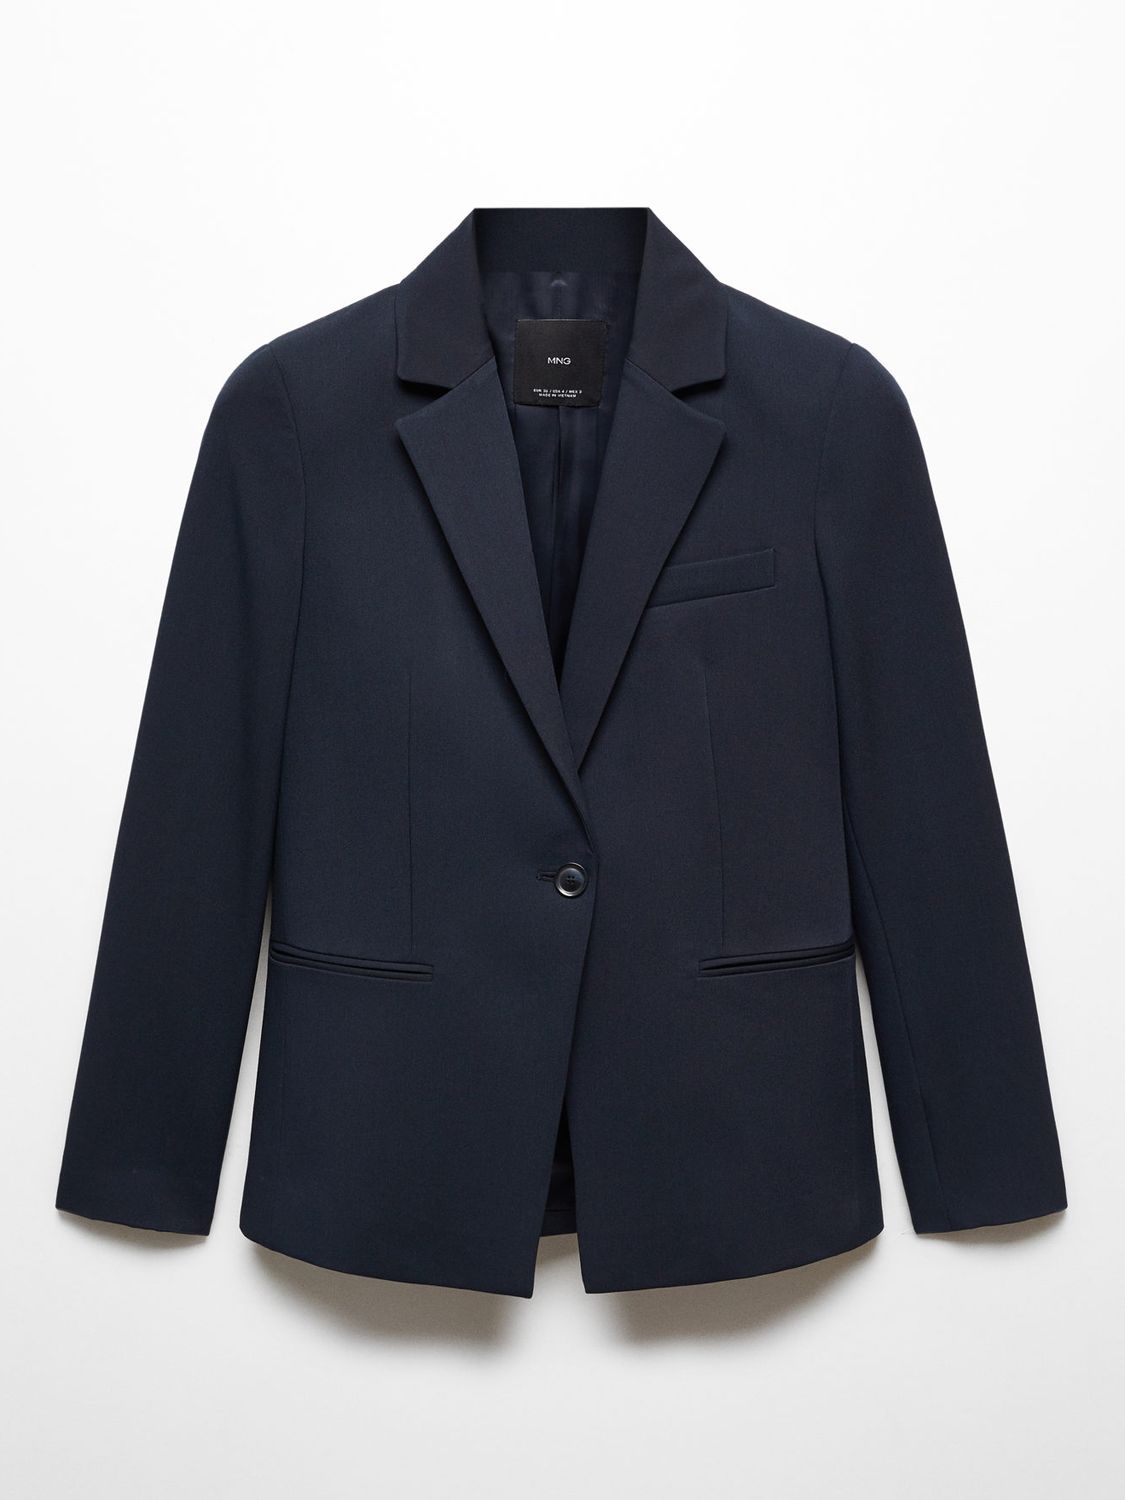 Mango Boreal Fitted Suit Jacket, Navy at John Lewis & Partners